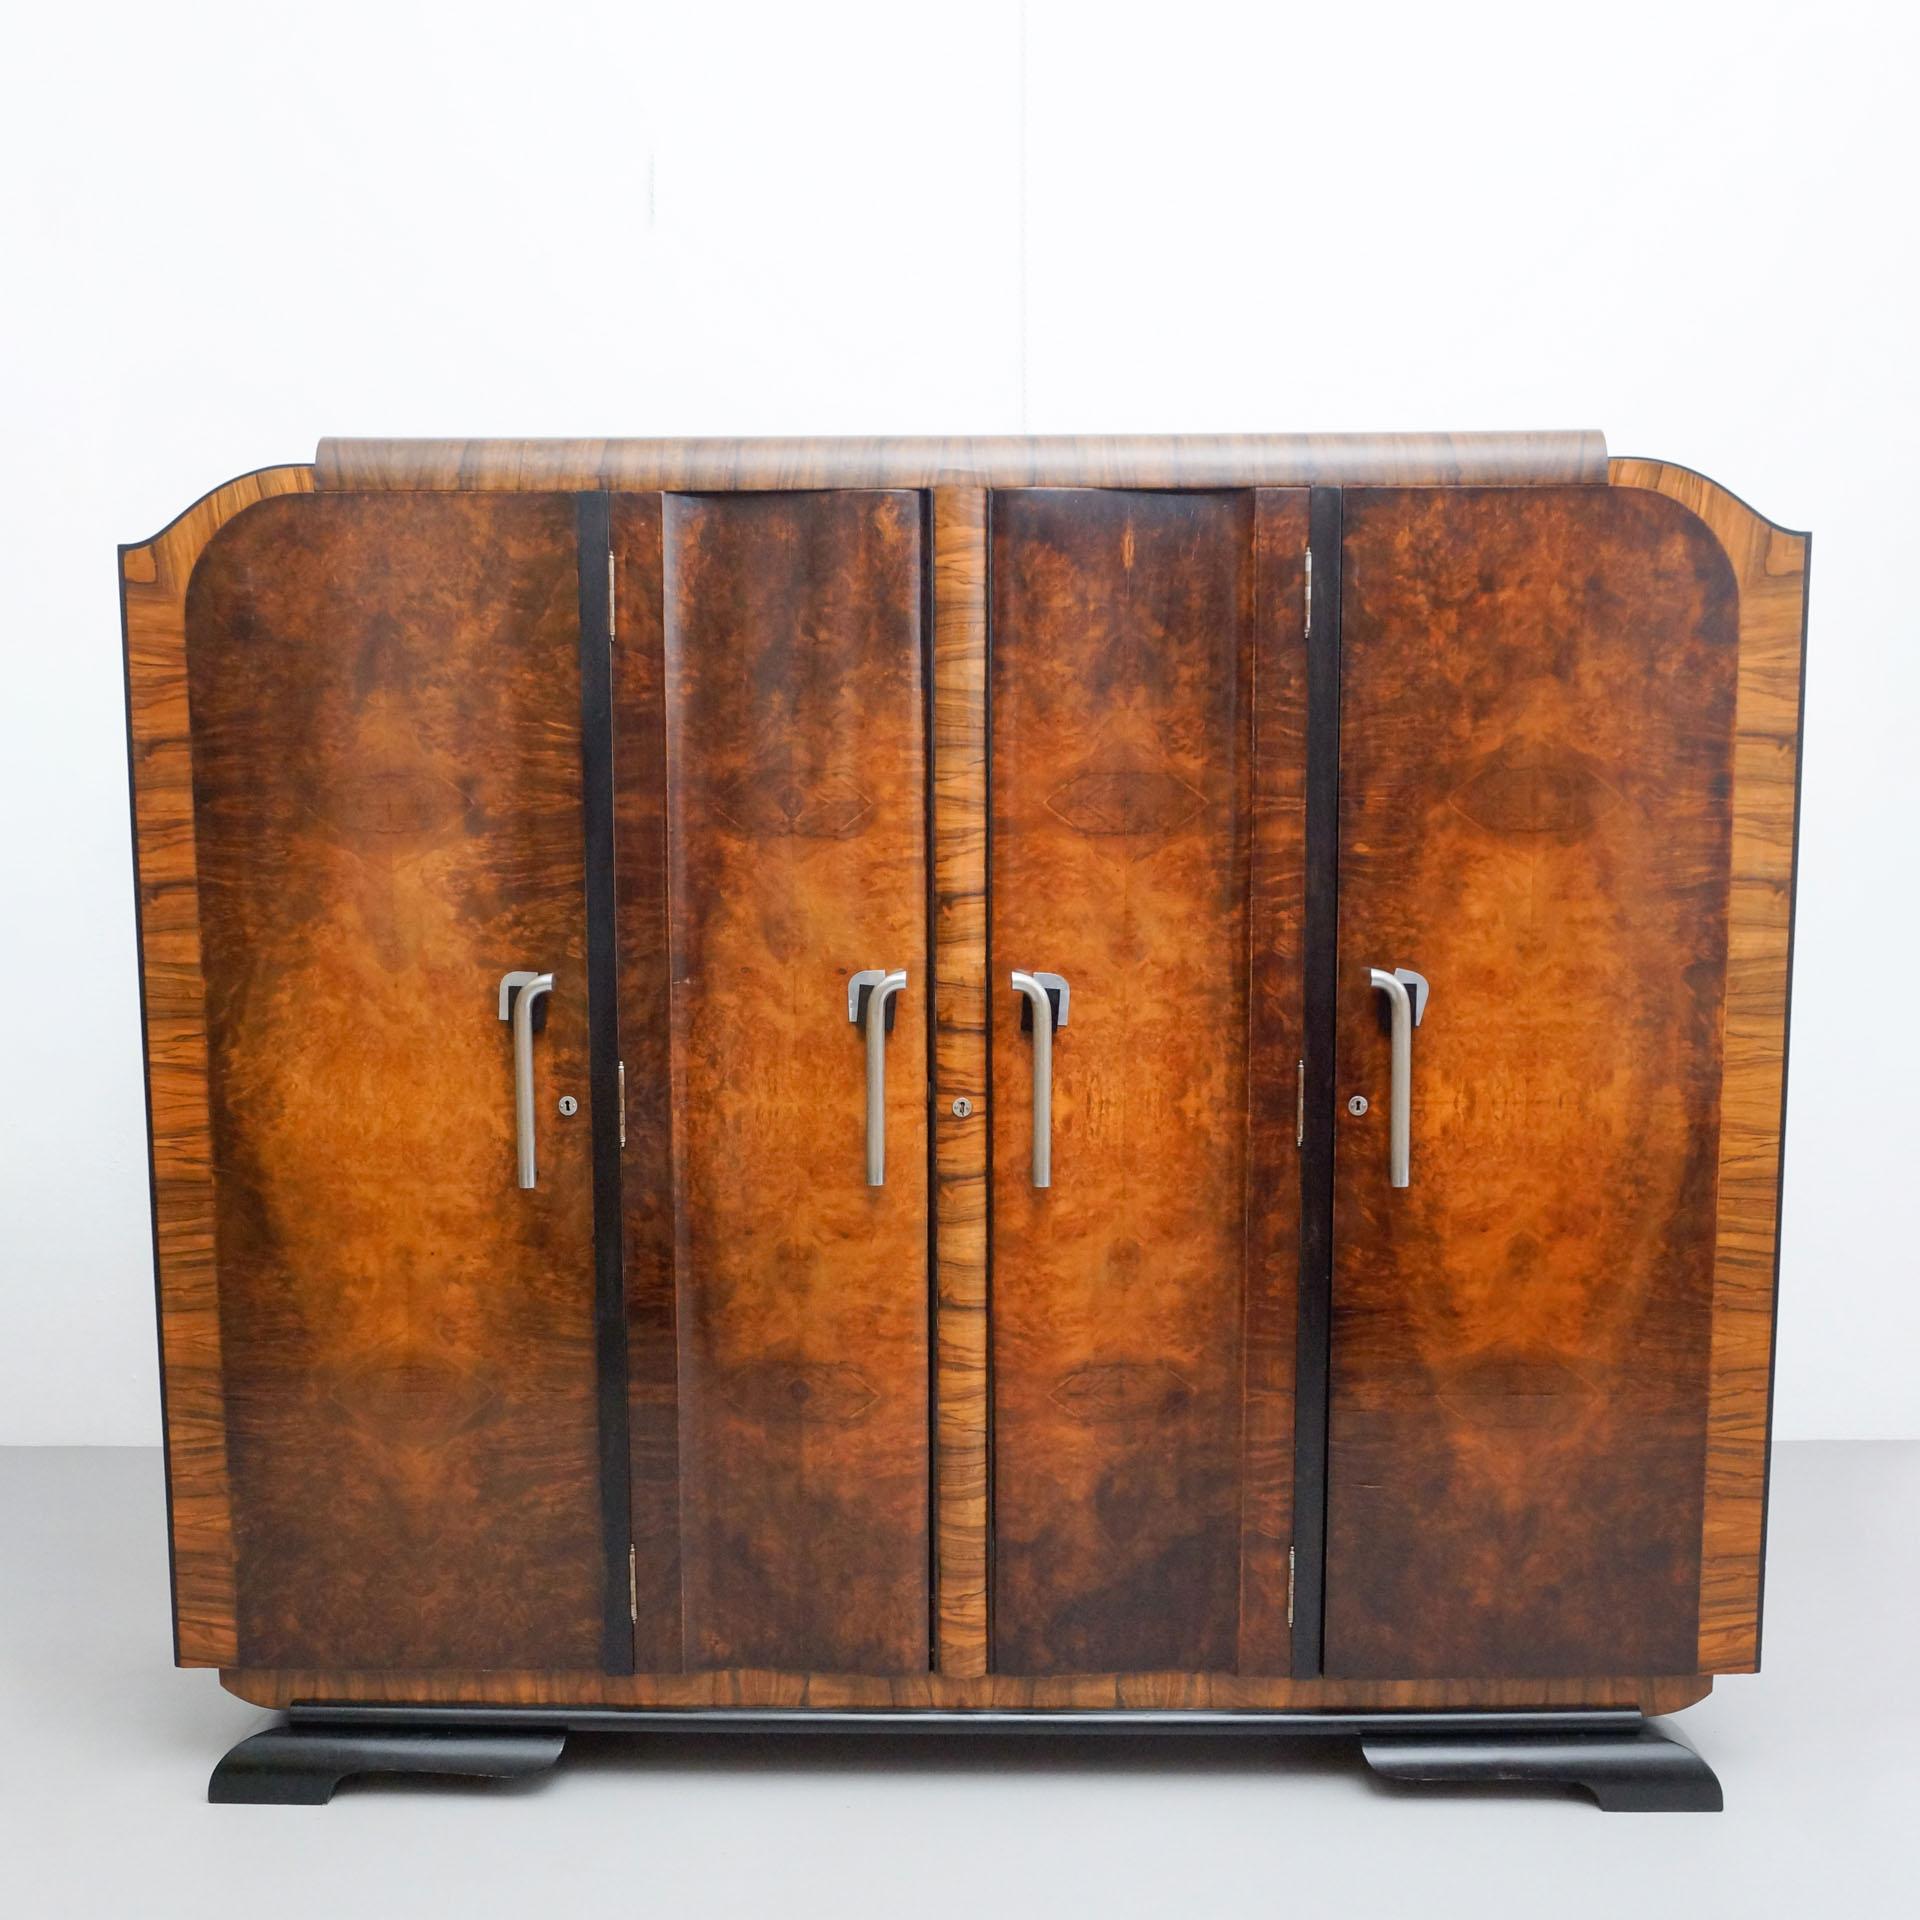 Early 20th century Art Deco woden wardrobe, by unknwon manufacturer from France.

In original condition, with minor wear consistent with age and use, preserving a beautiful patina.

Materials:
Wood

Dimensions:
D 59 cm x W 222 cm x H 187 cm.